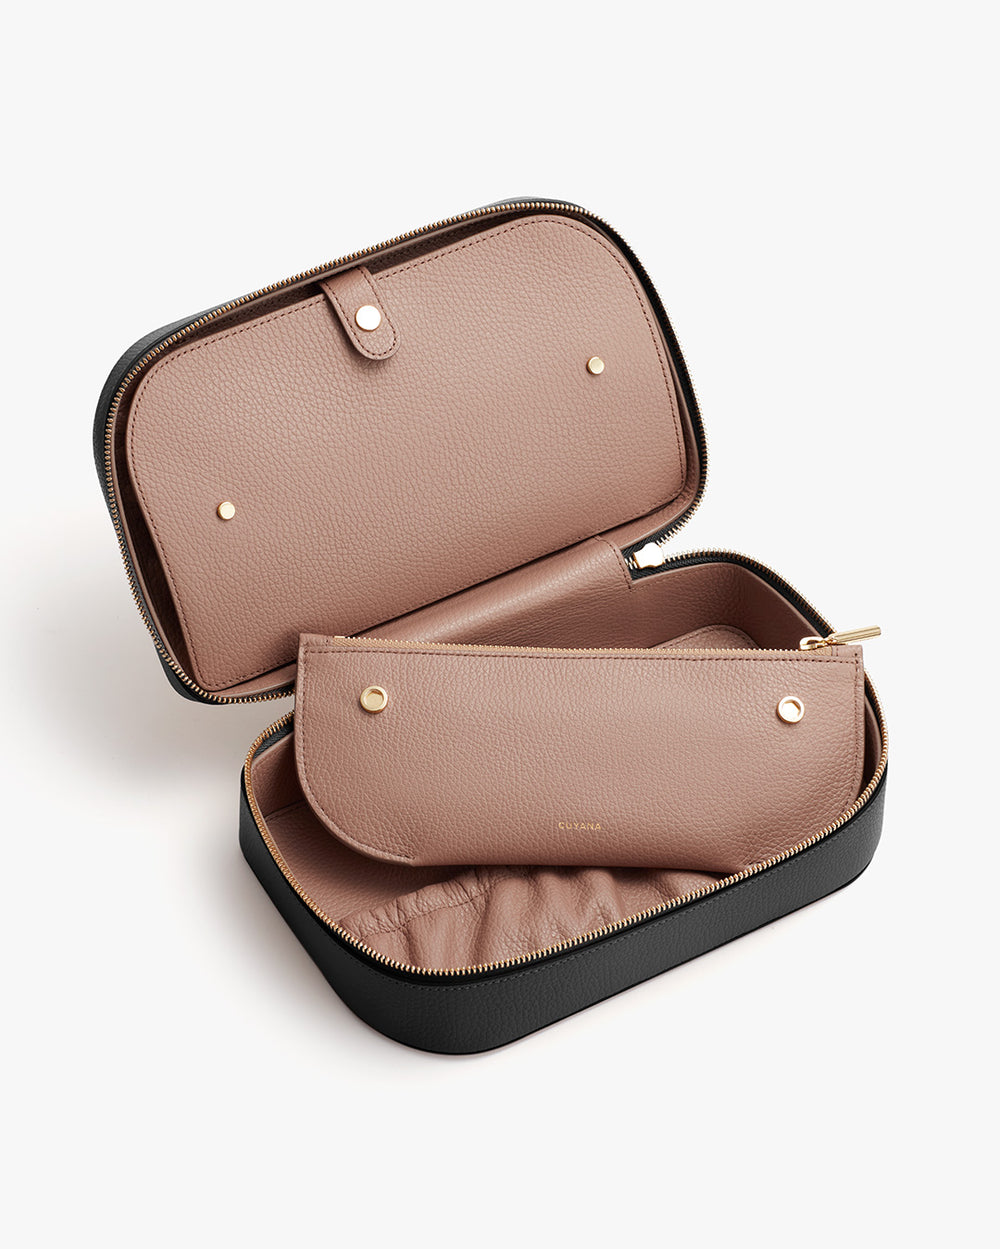 Open case with a smaller pouch inside, both on a plain background.